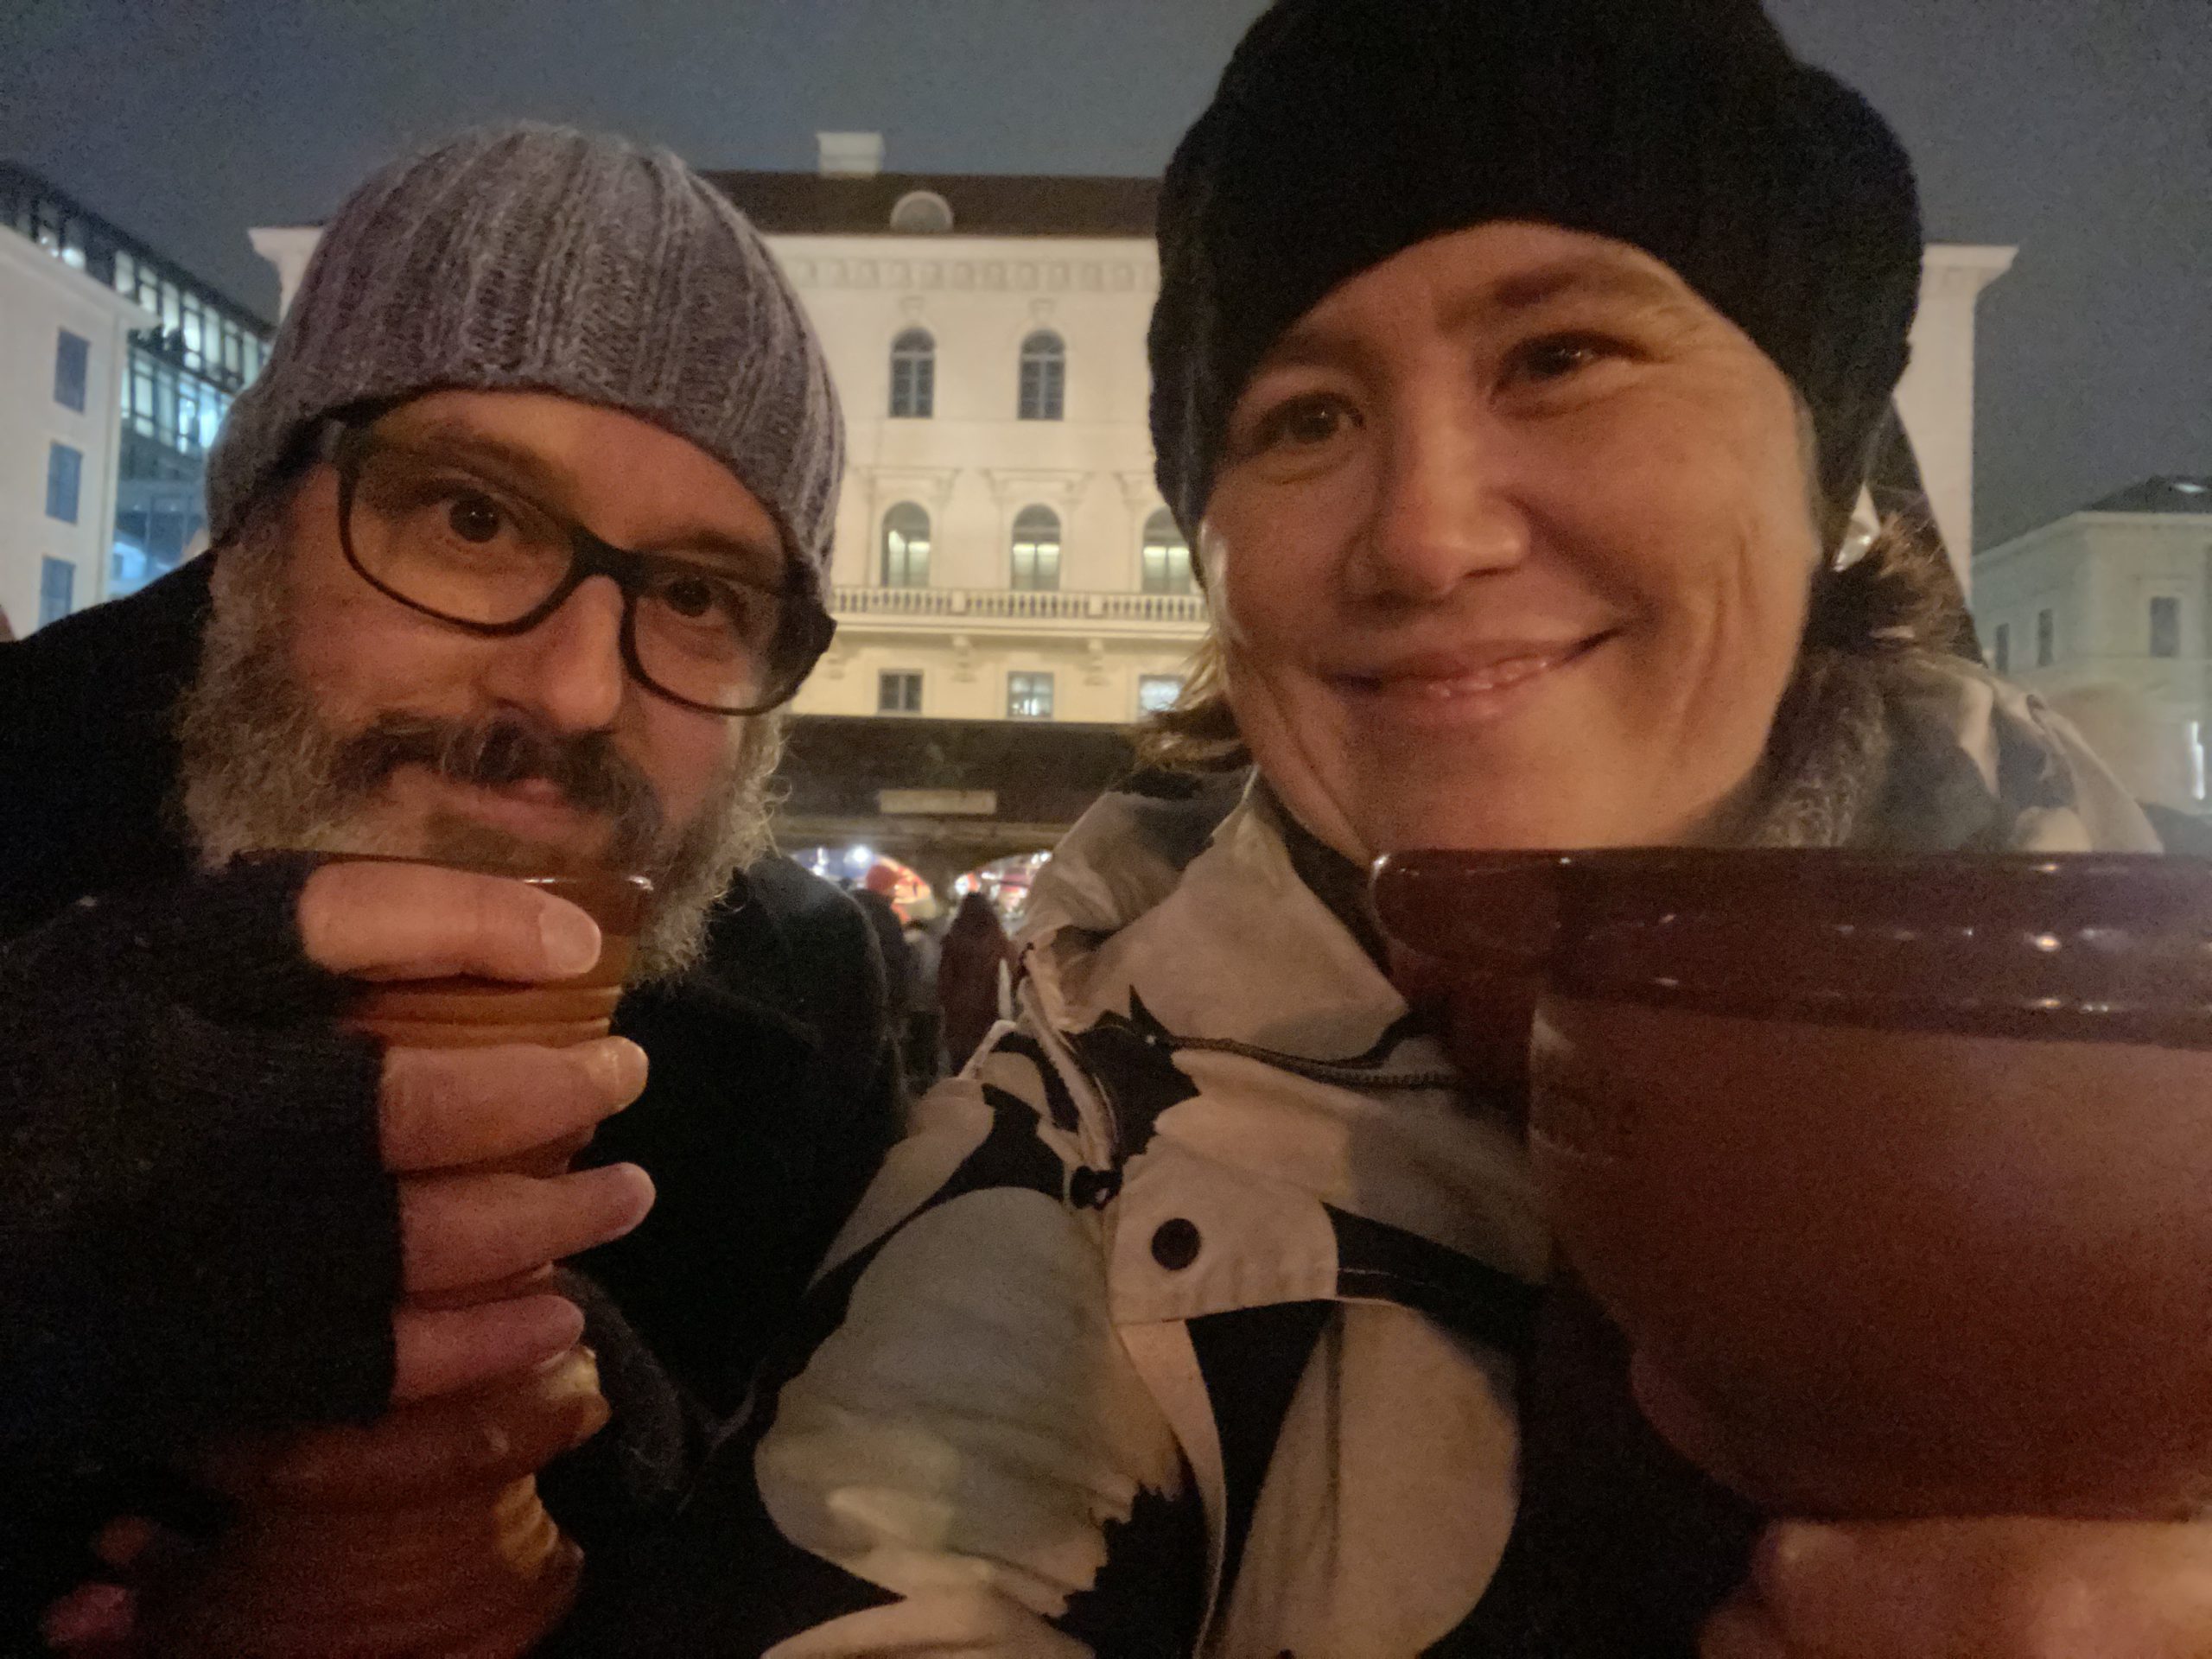 Enjoying our mead and Feuerzangenbowle